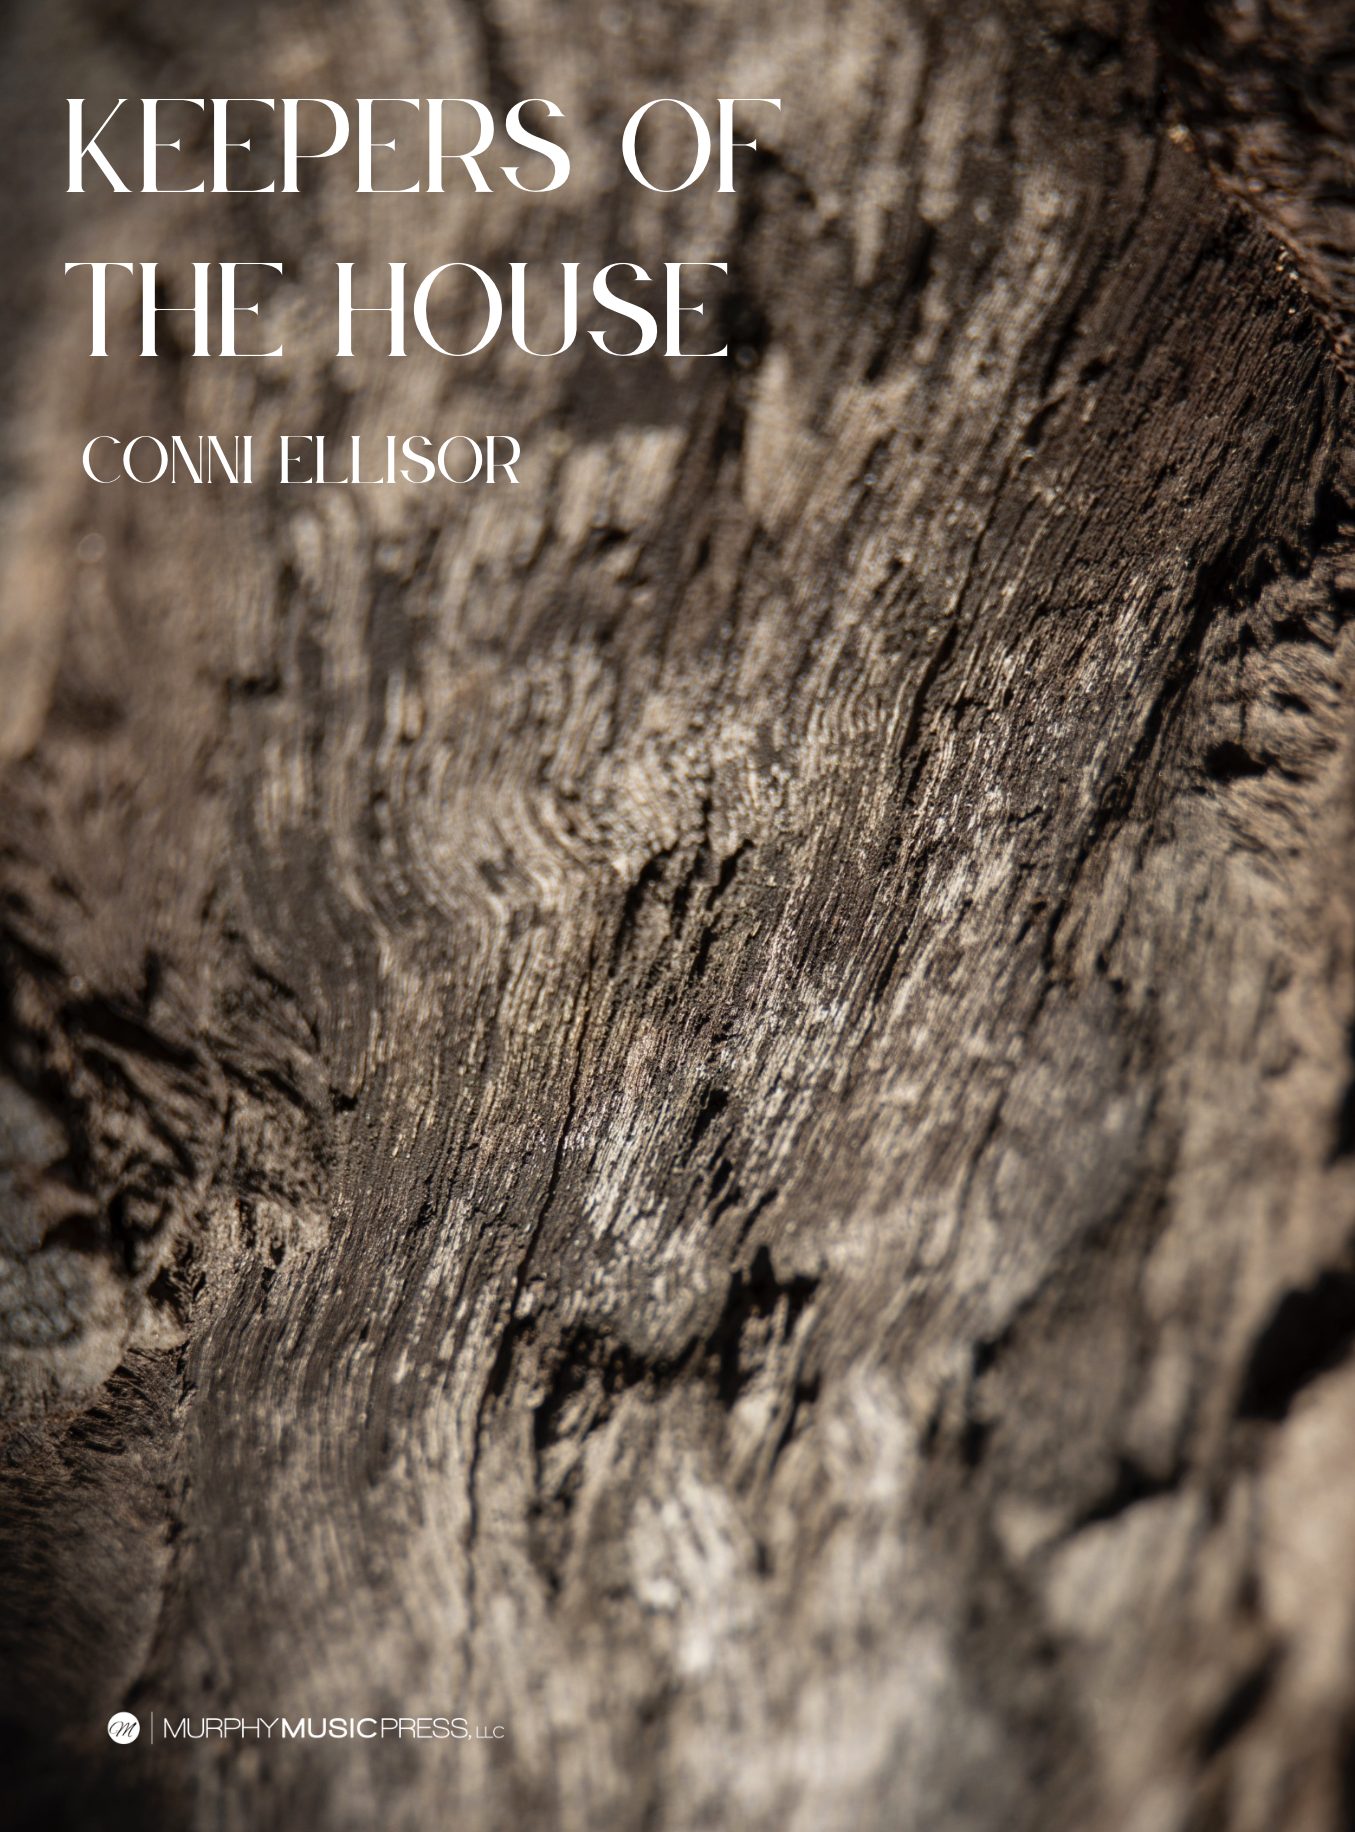 The Keepers Of The House by Coni Ellisor